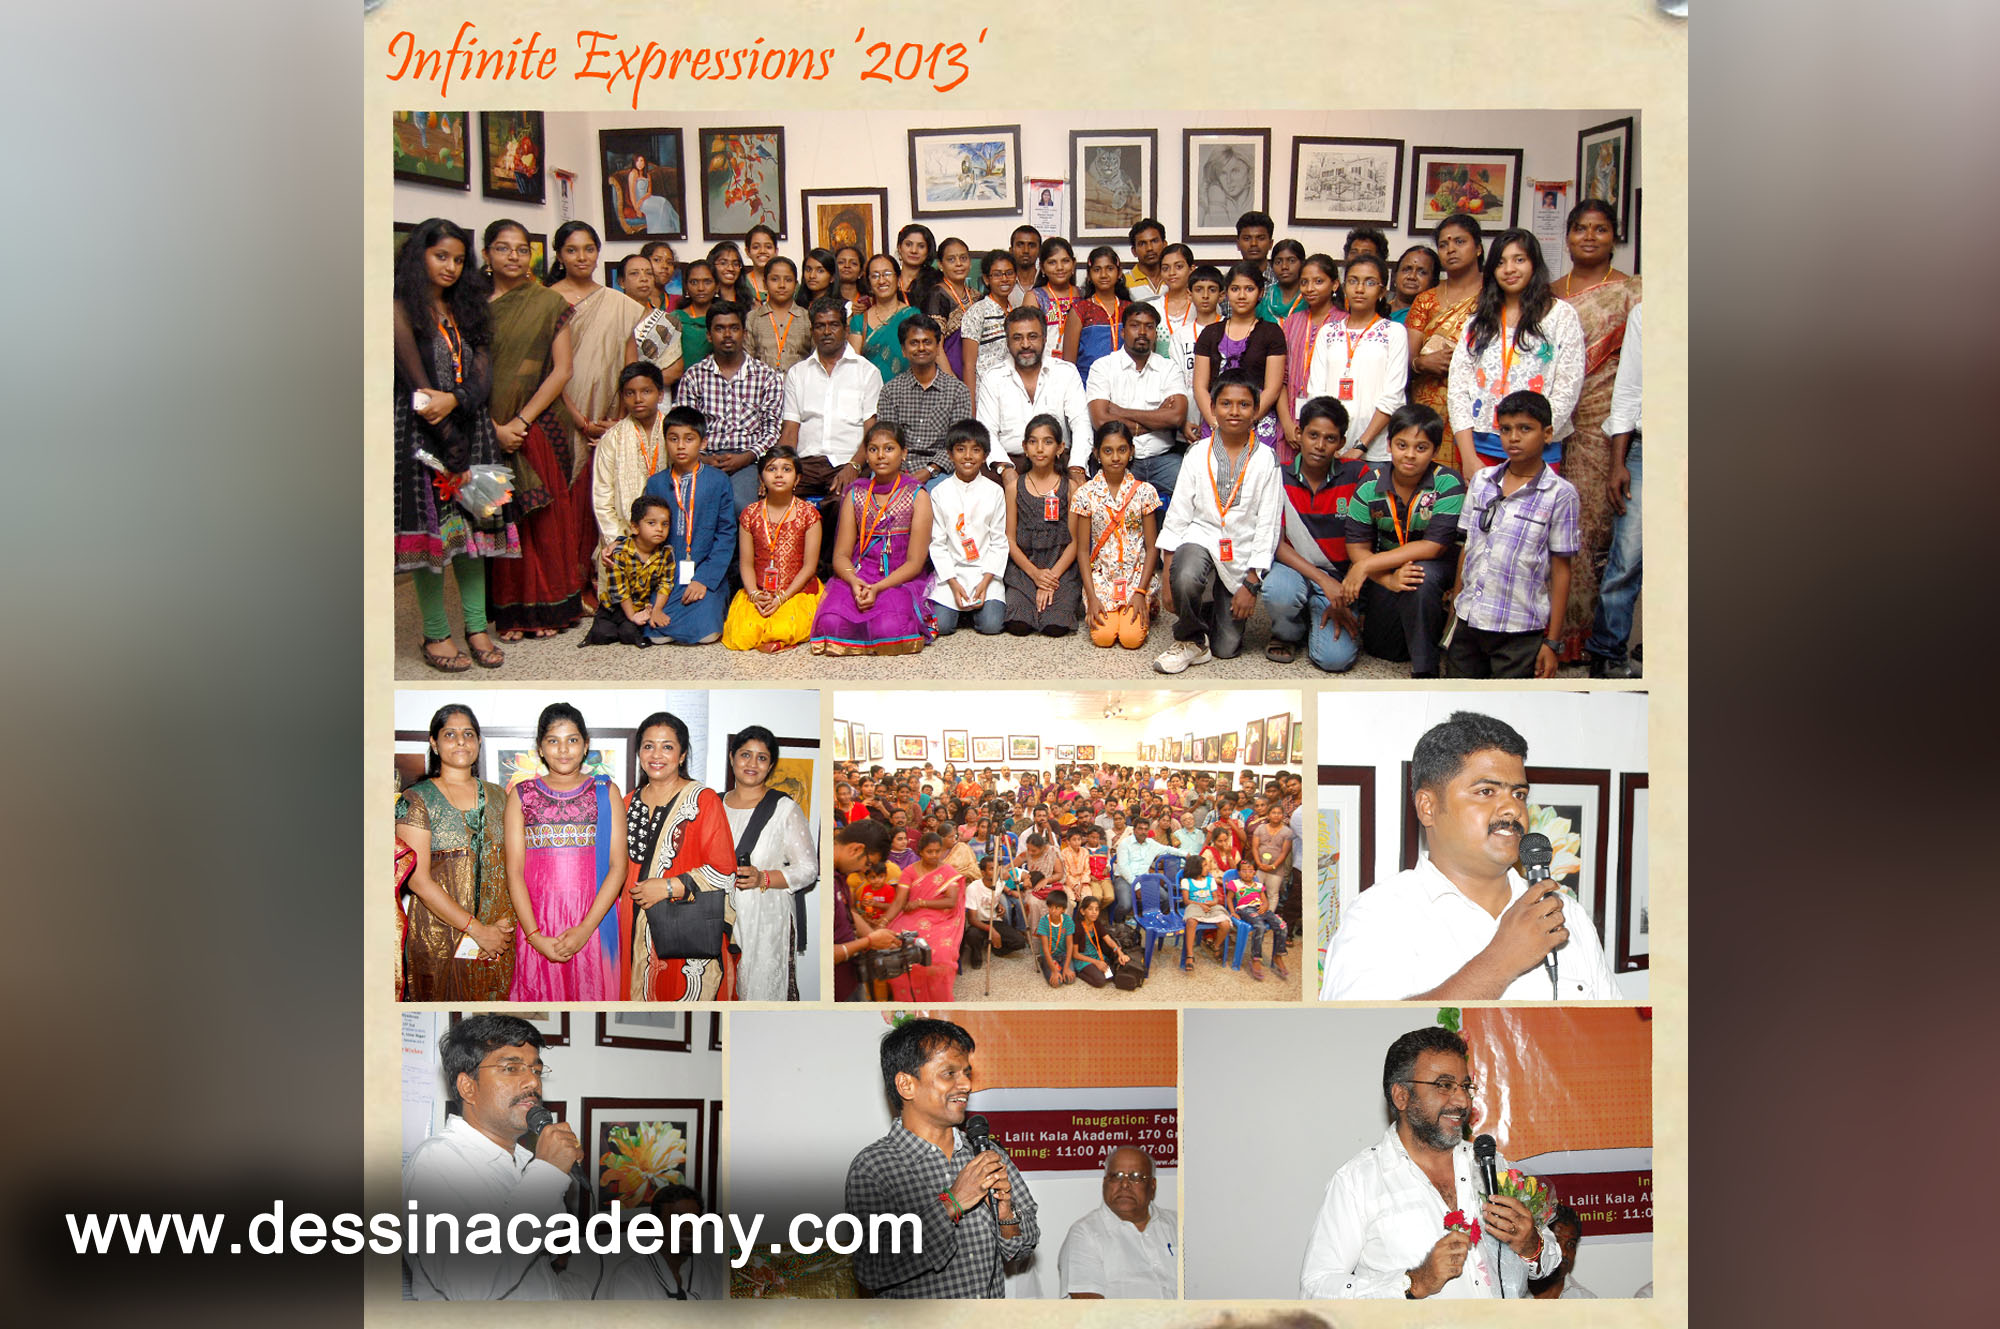 Dessin School of arts Event Gallery 3, Painting Coaching in ChennaiDessin School of Arts